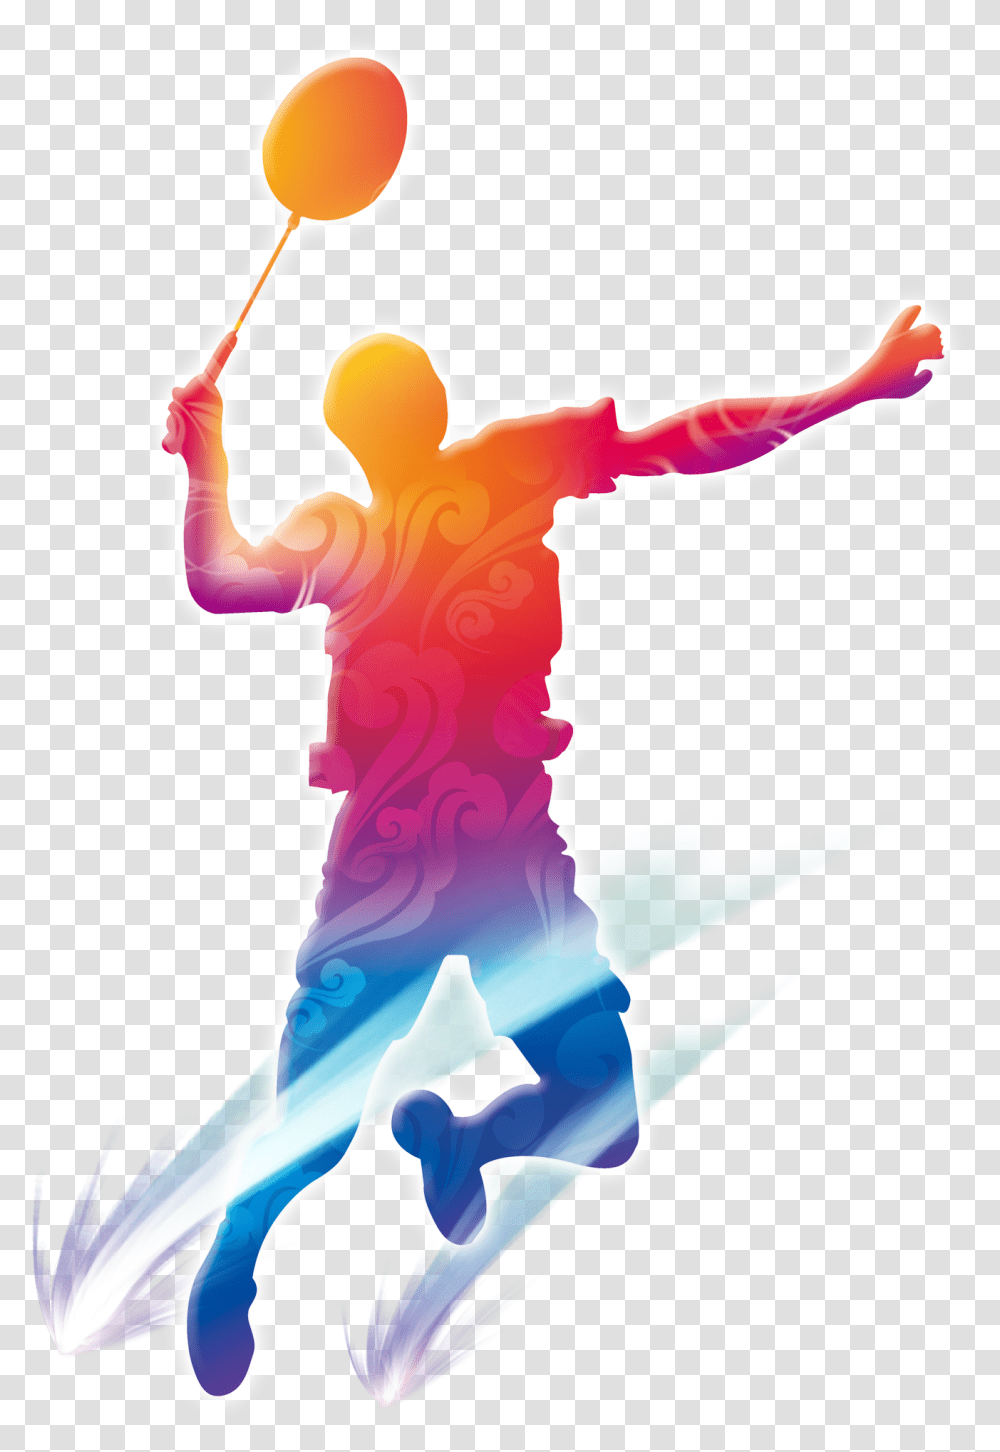 Download Of Silhouettes Badminton Playing People Free Hd, Graphics, Art, Flare, Light Transparent Png